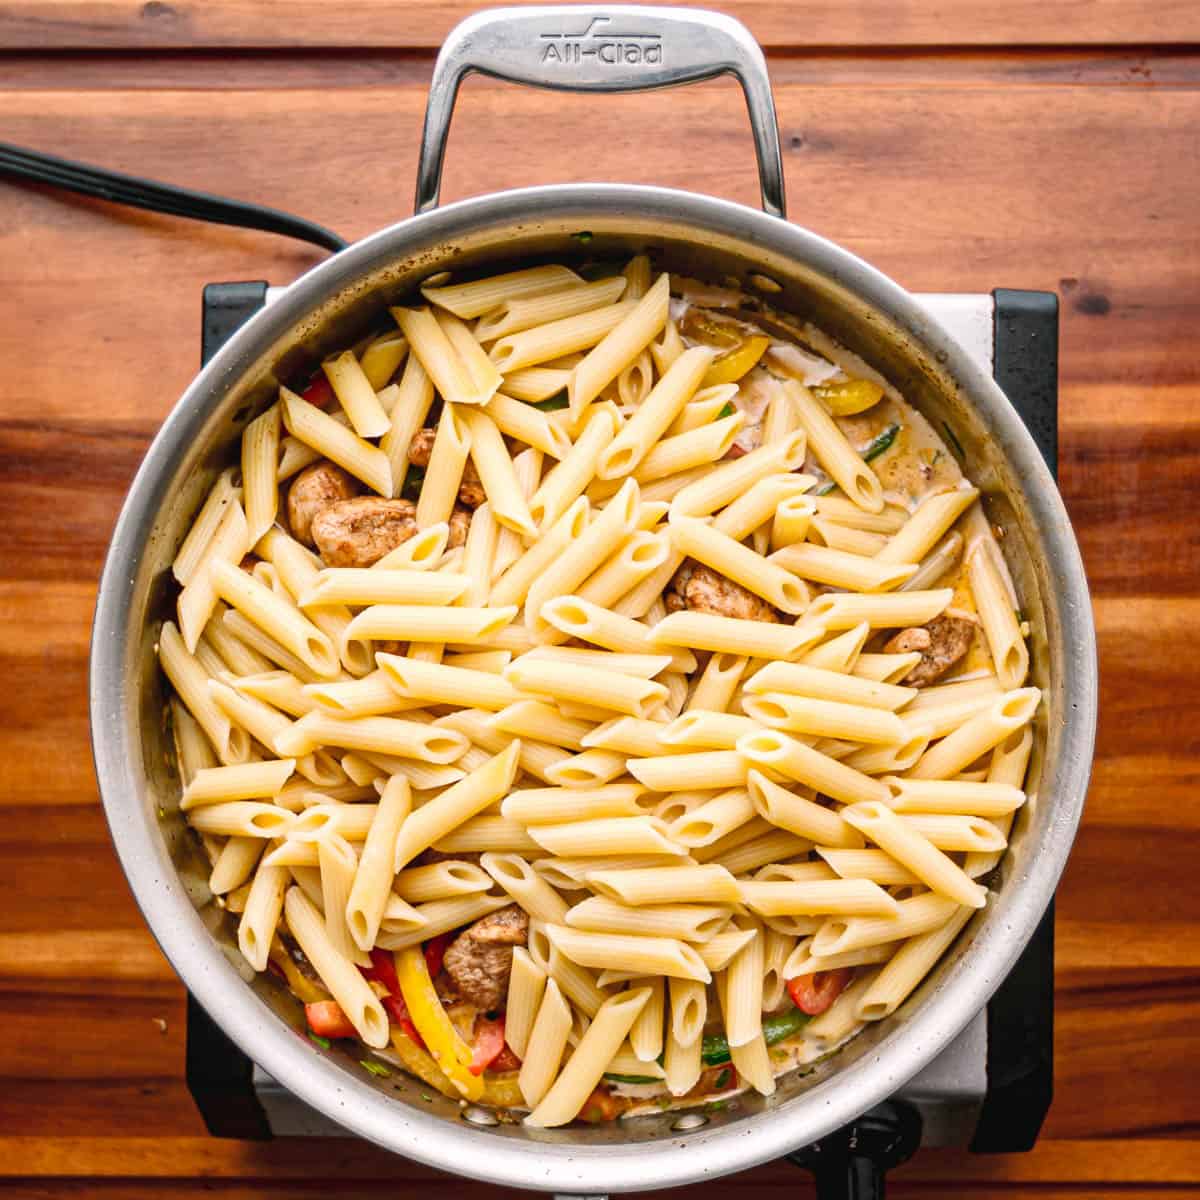 Add the browned chicken, the nearly al dente pasta, and a bit of pasta water to the pan.